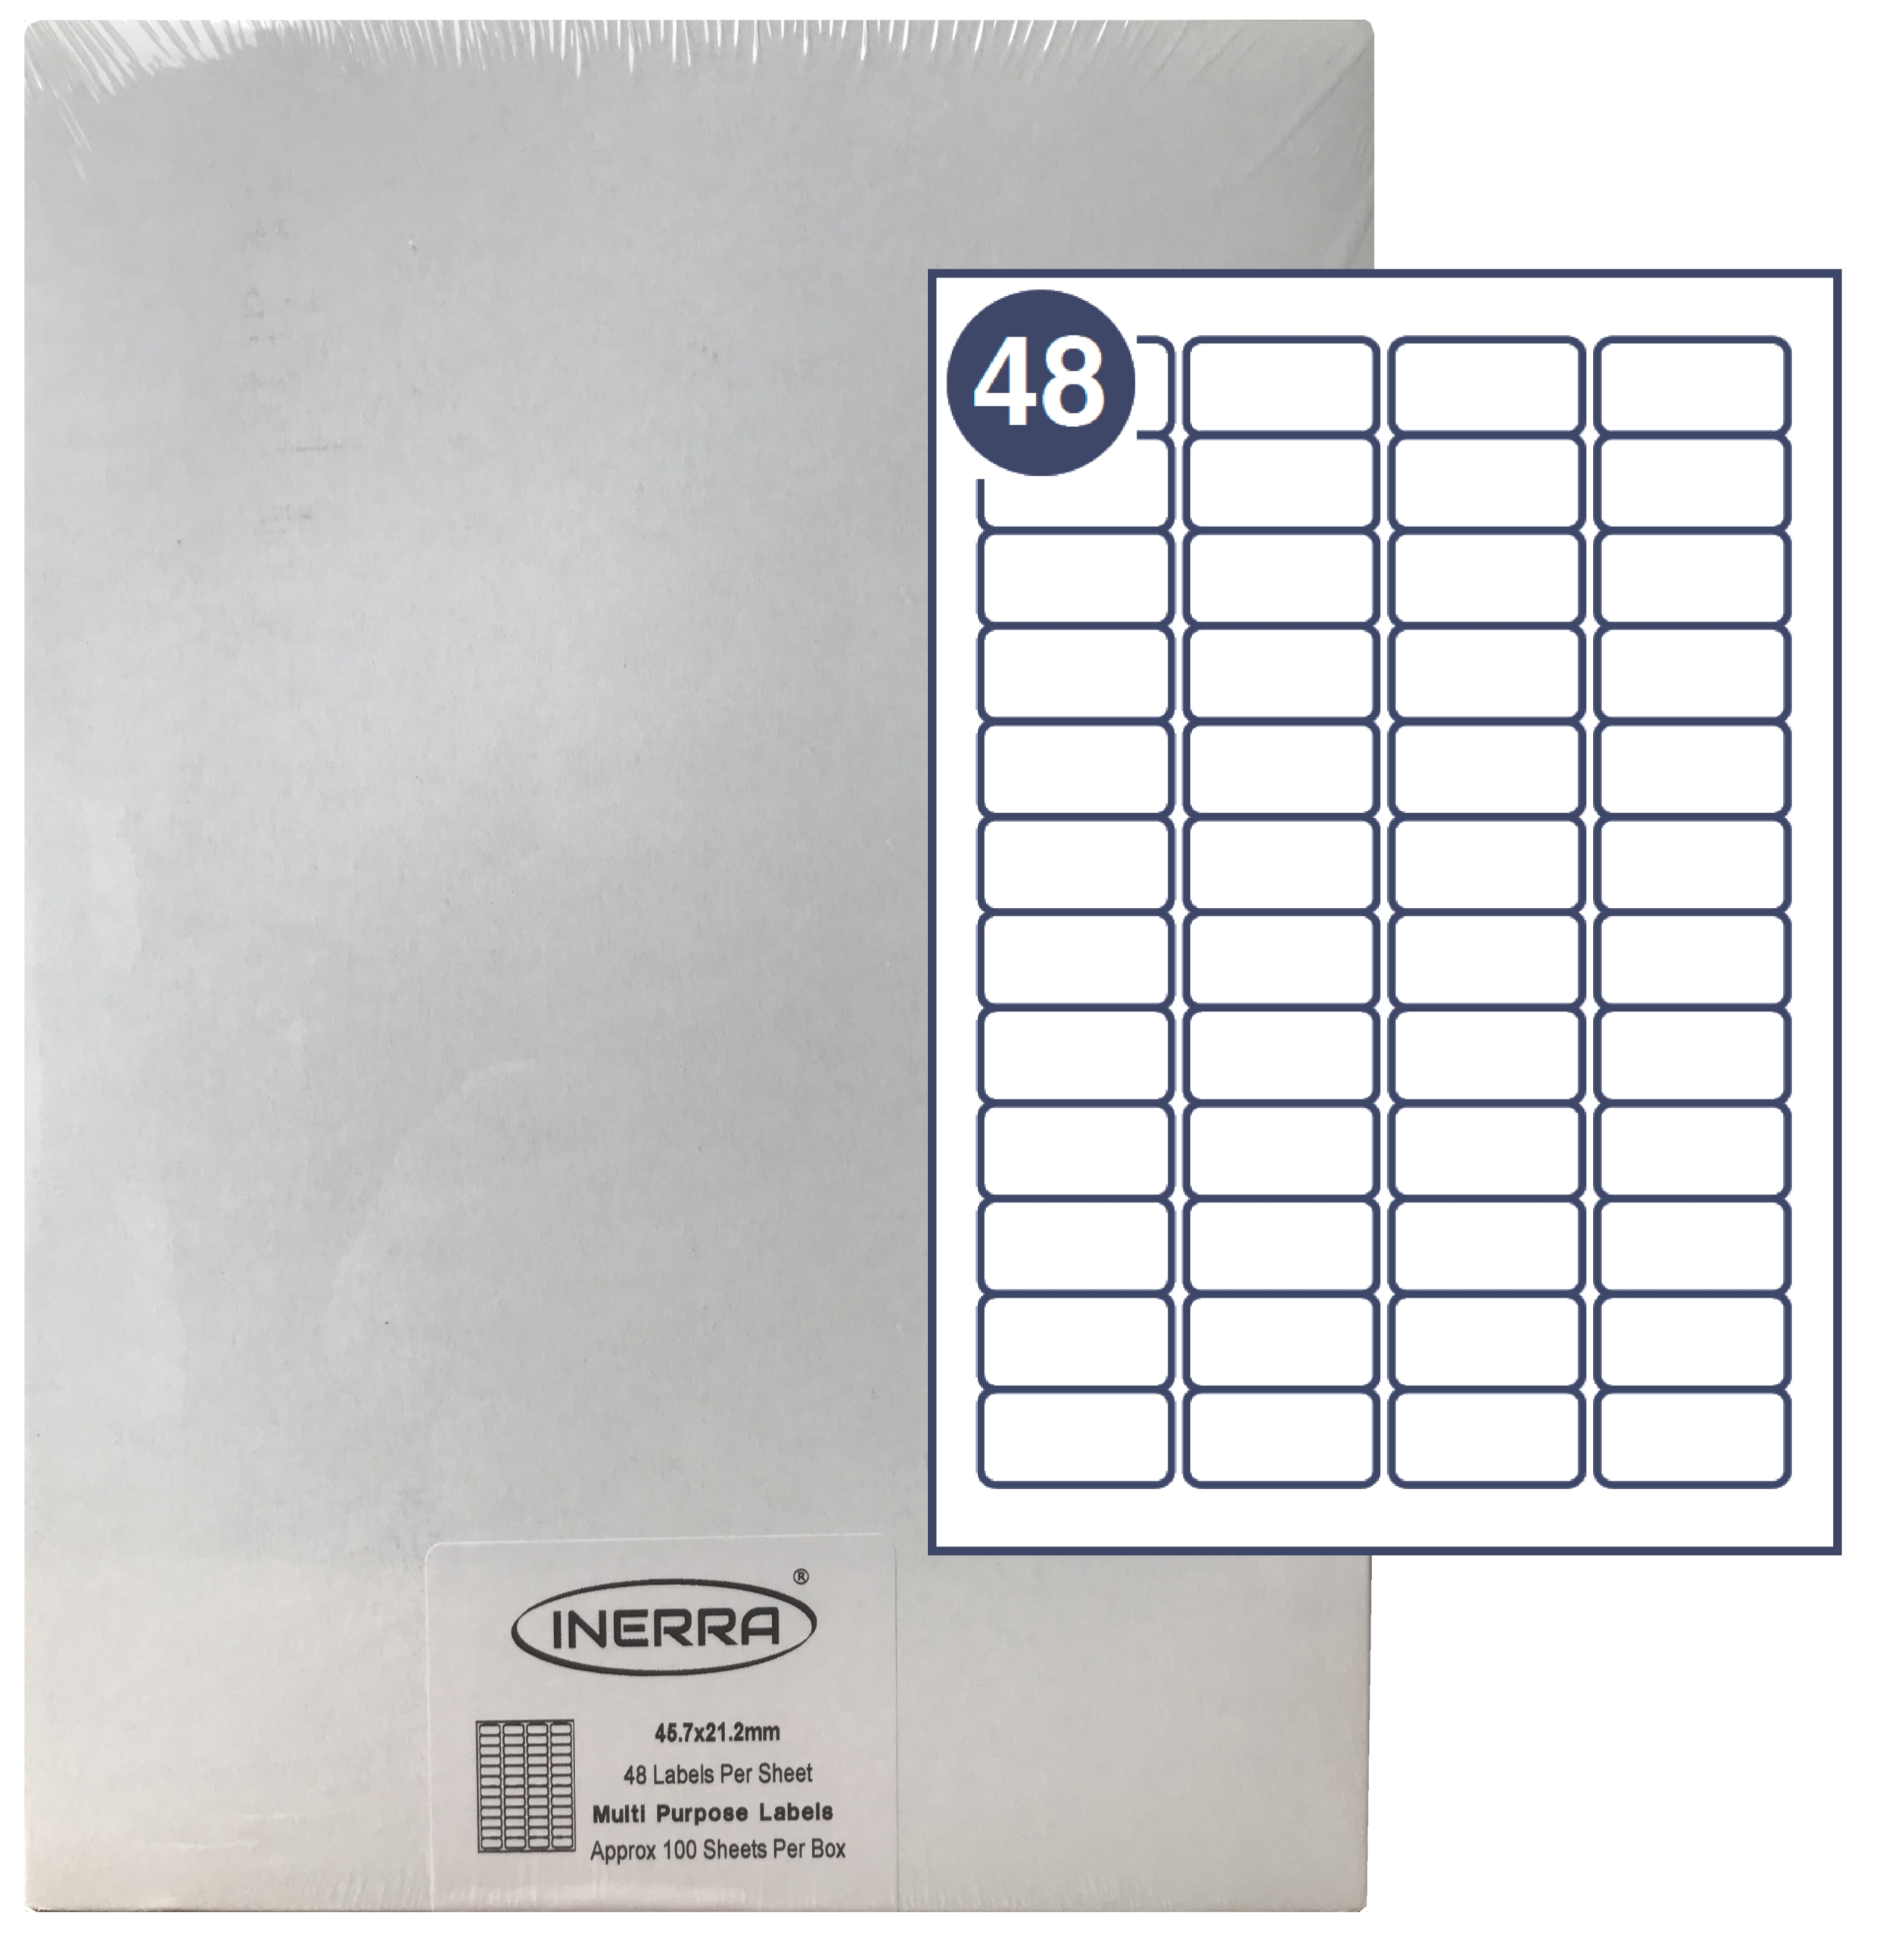 A4 Labels 21 Per Sheet Download Free / Free Template For Inerra Blank Intended For Label Template 21 Per Sheet Word